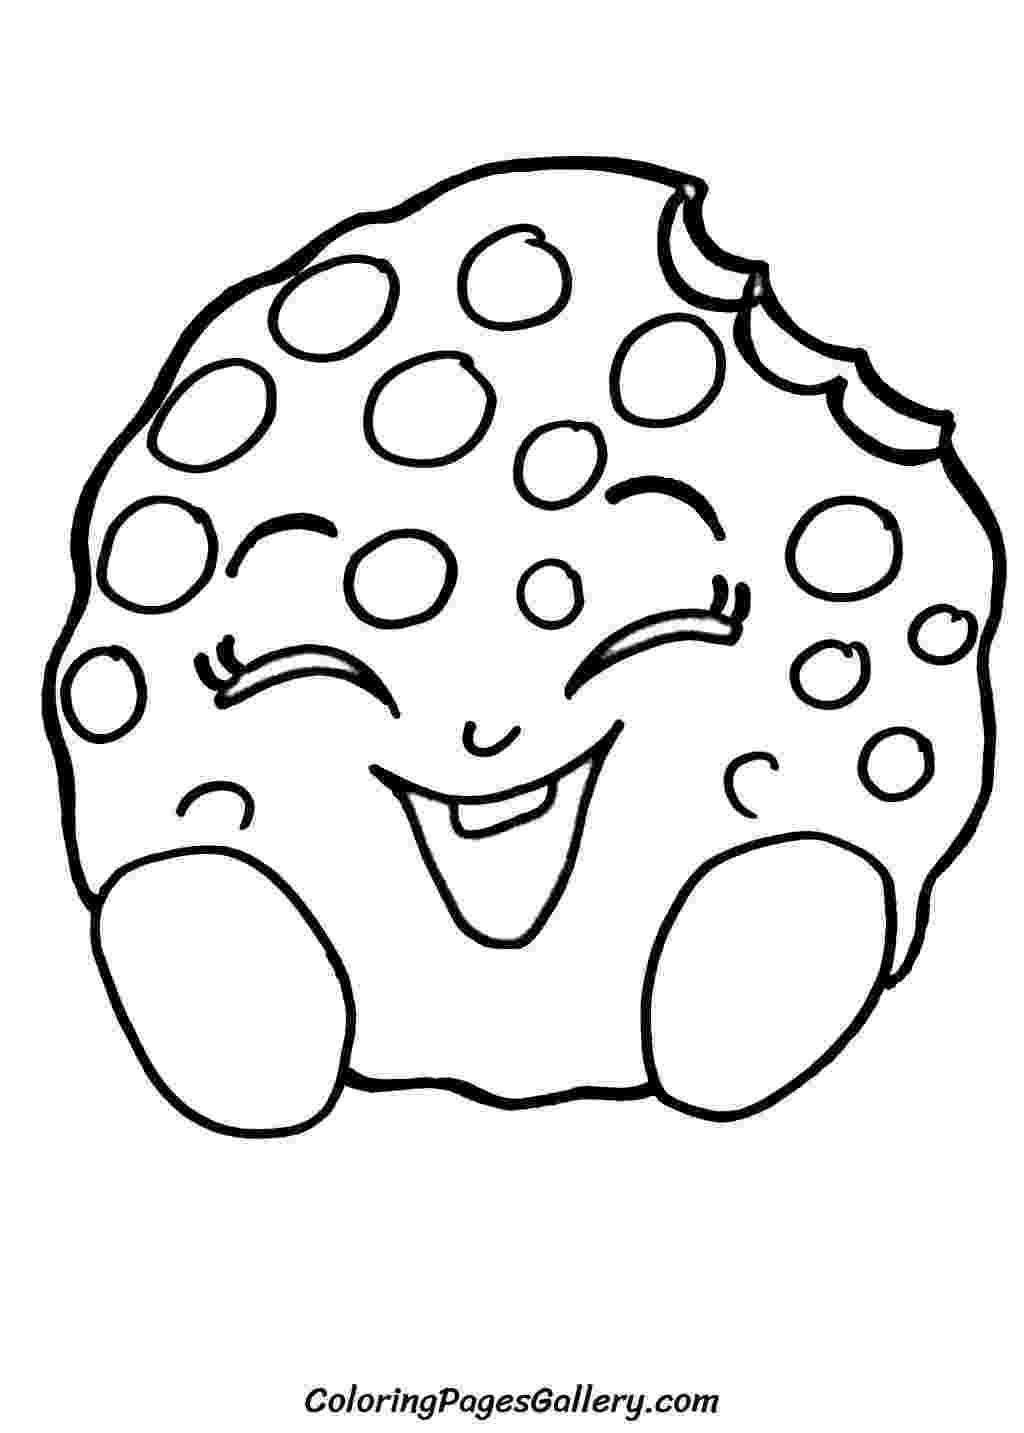 shopkins cookie candy cookie shopkins coloring page free shopkins shopkins cookie 